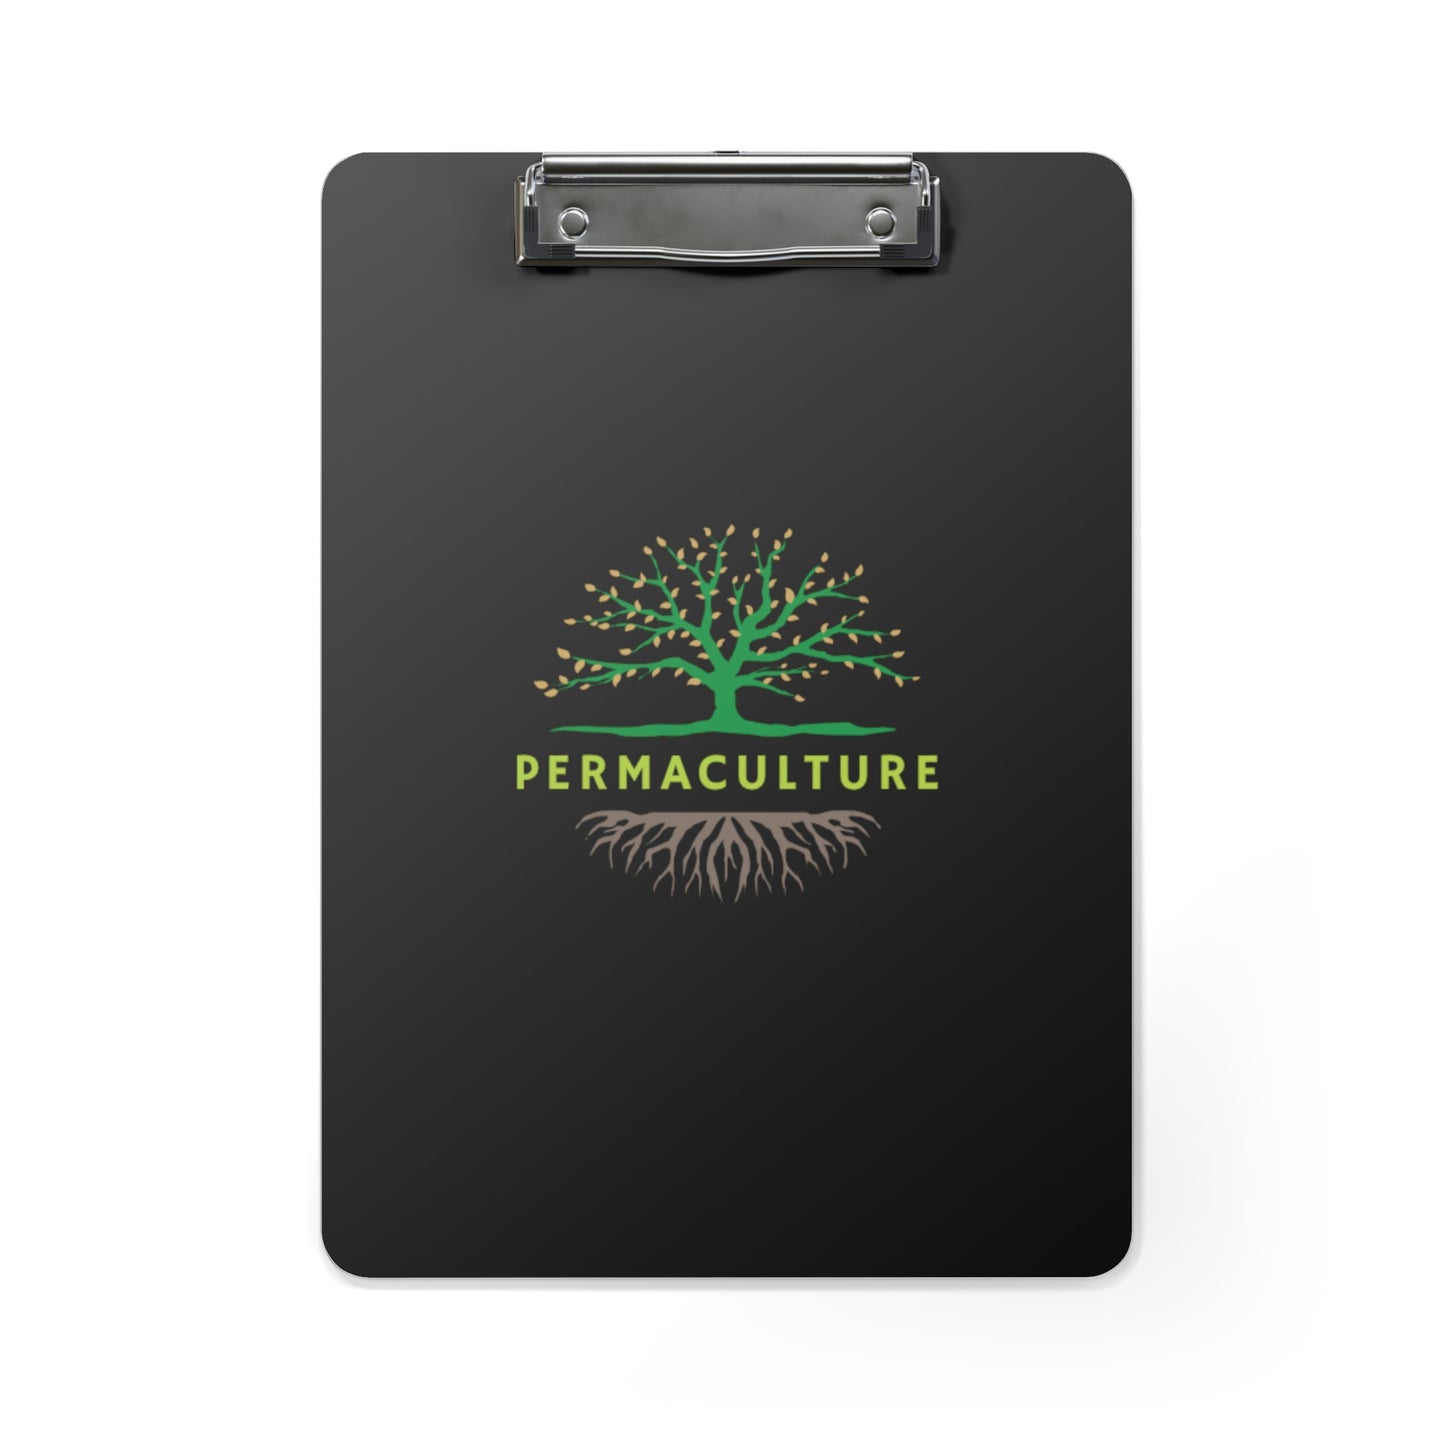 Black Clipboard - Permaculture